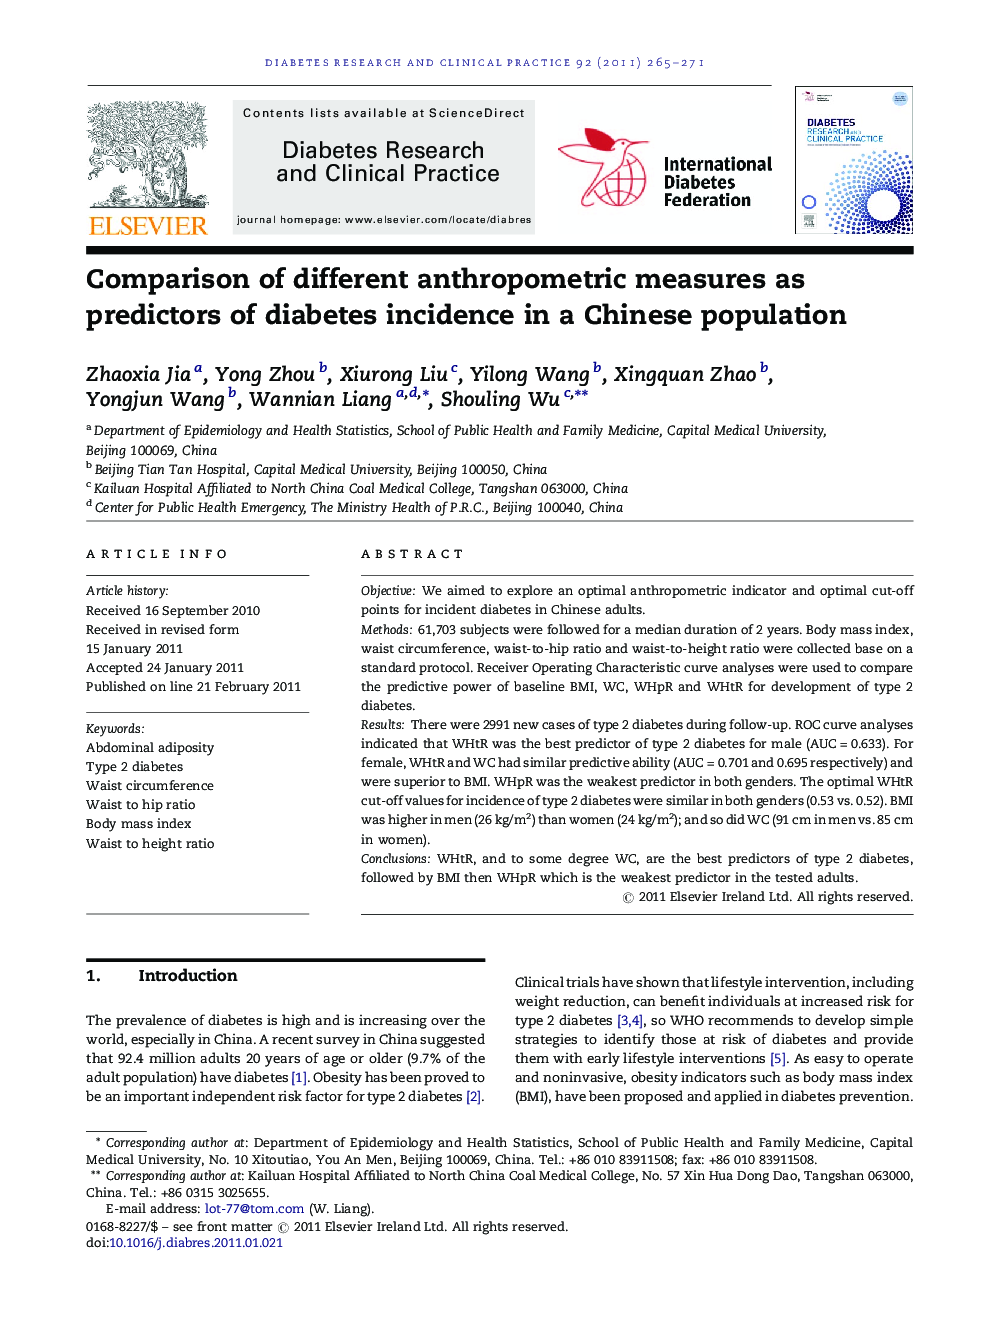 Comparison of different anthropometric measures as predictors of diabetes incidence in a Chinese population